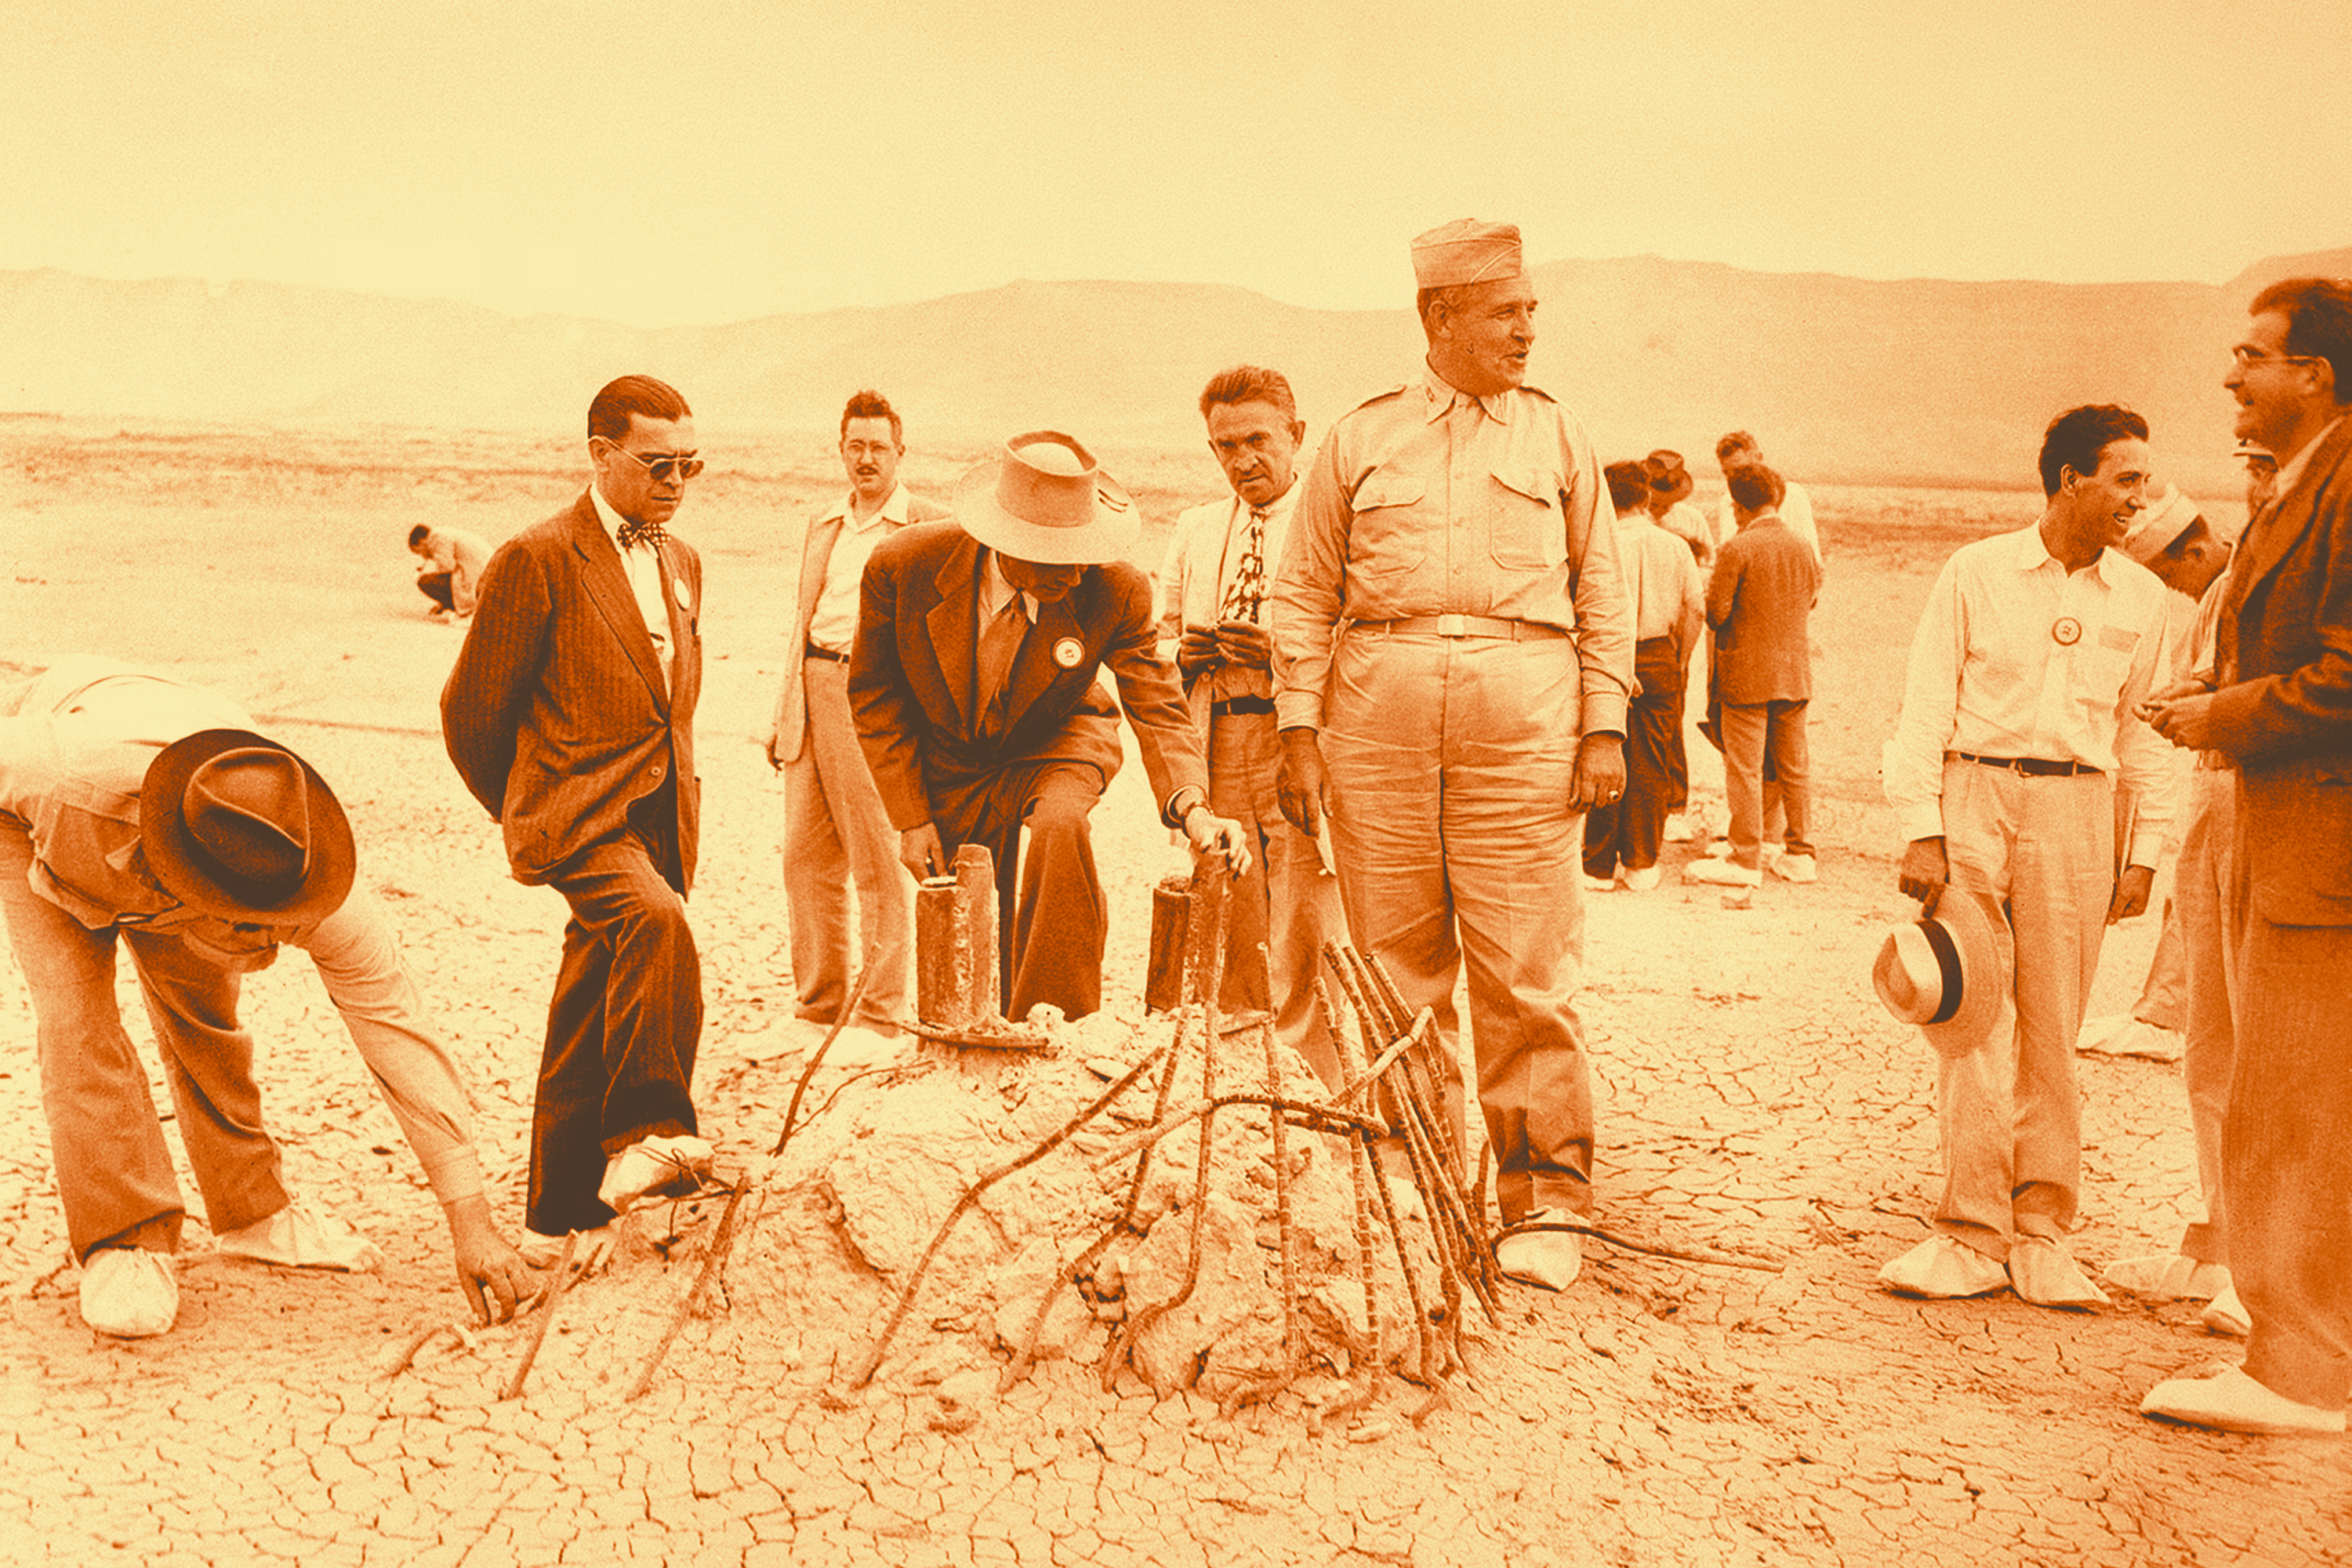 A black and white photo, tinted orange, of a group of men in suits and a general in uniform gathered around twisted rebar protruding from dry, cracked sand in the desert.